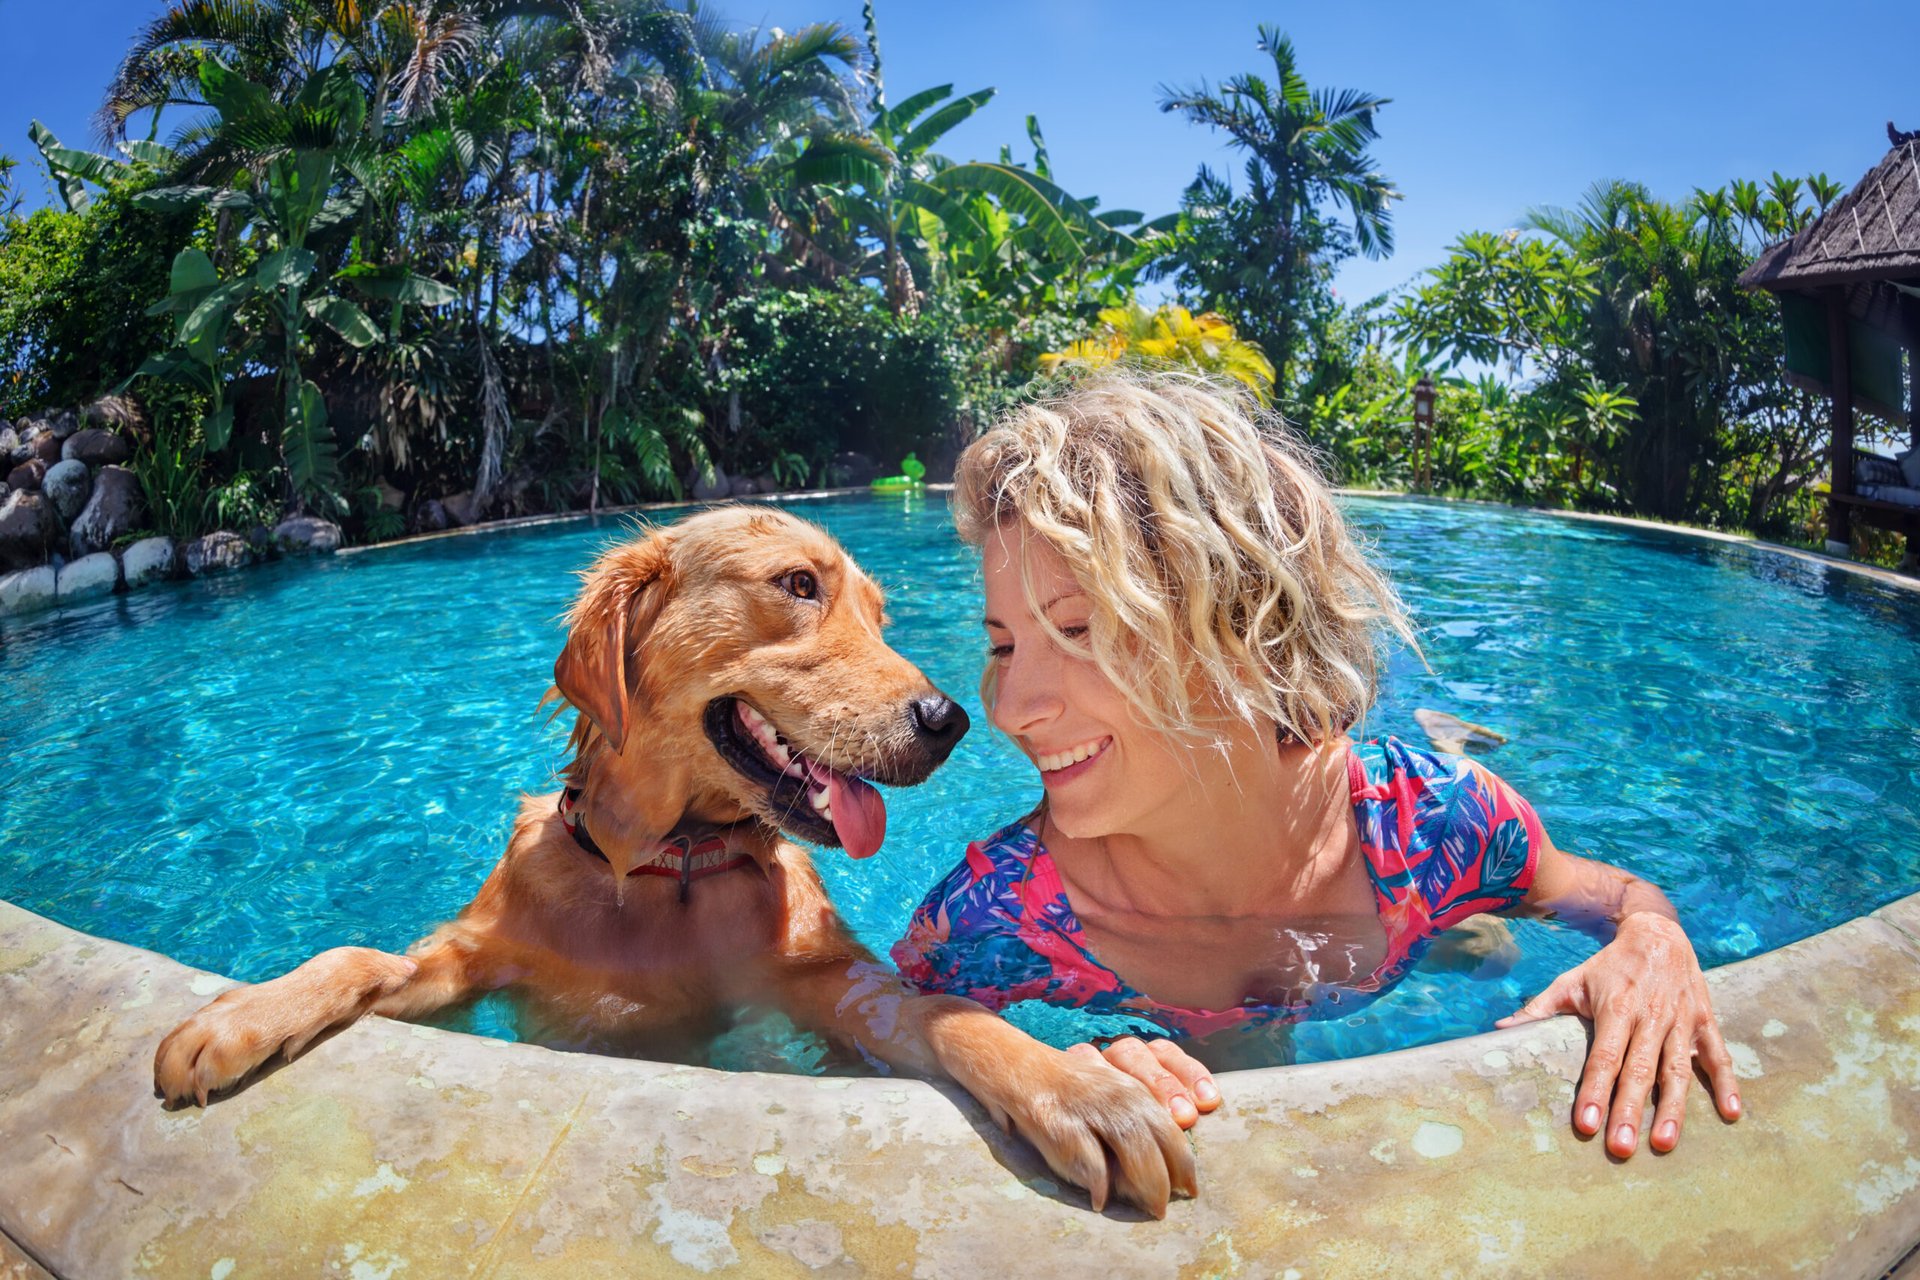 Woman with a dog in a pool